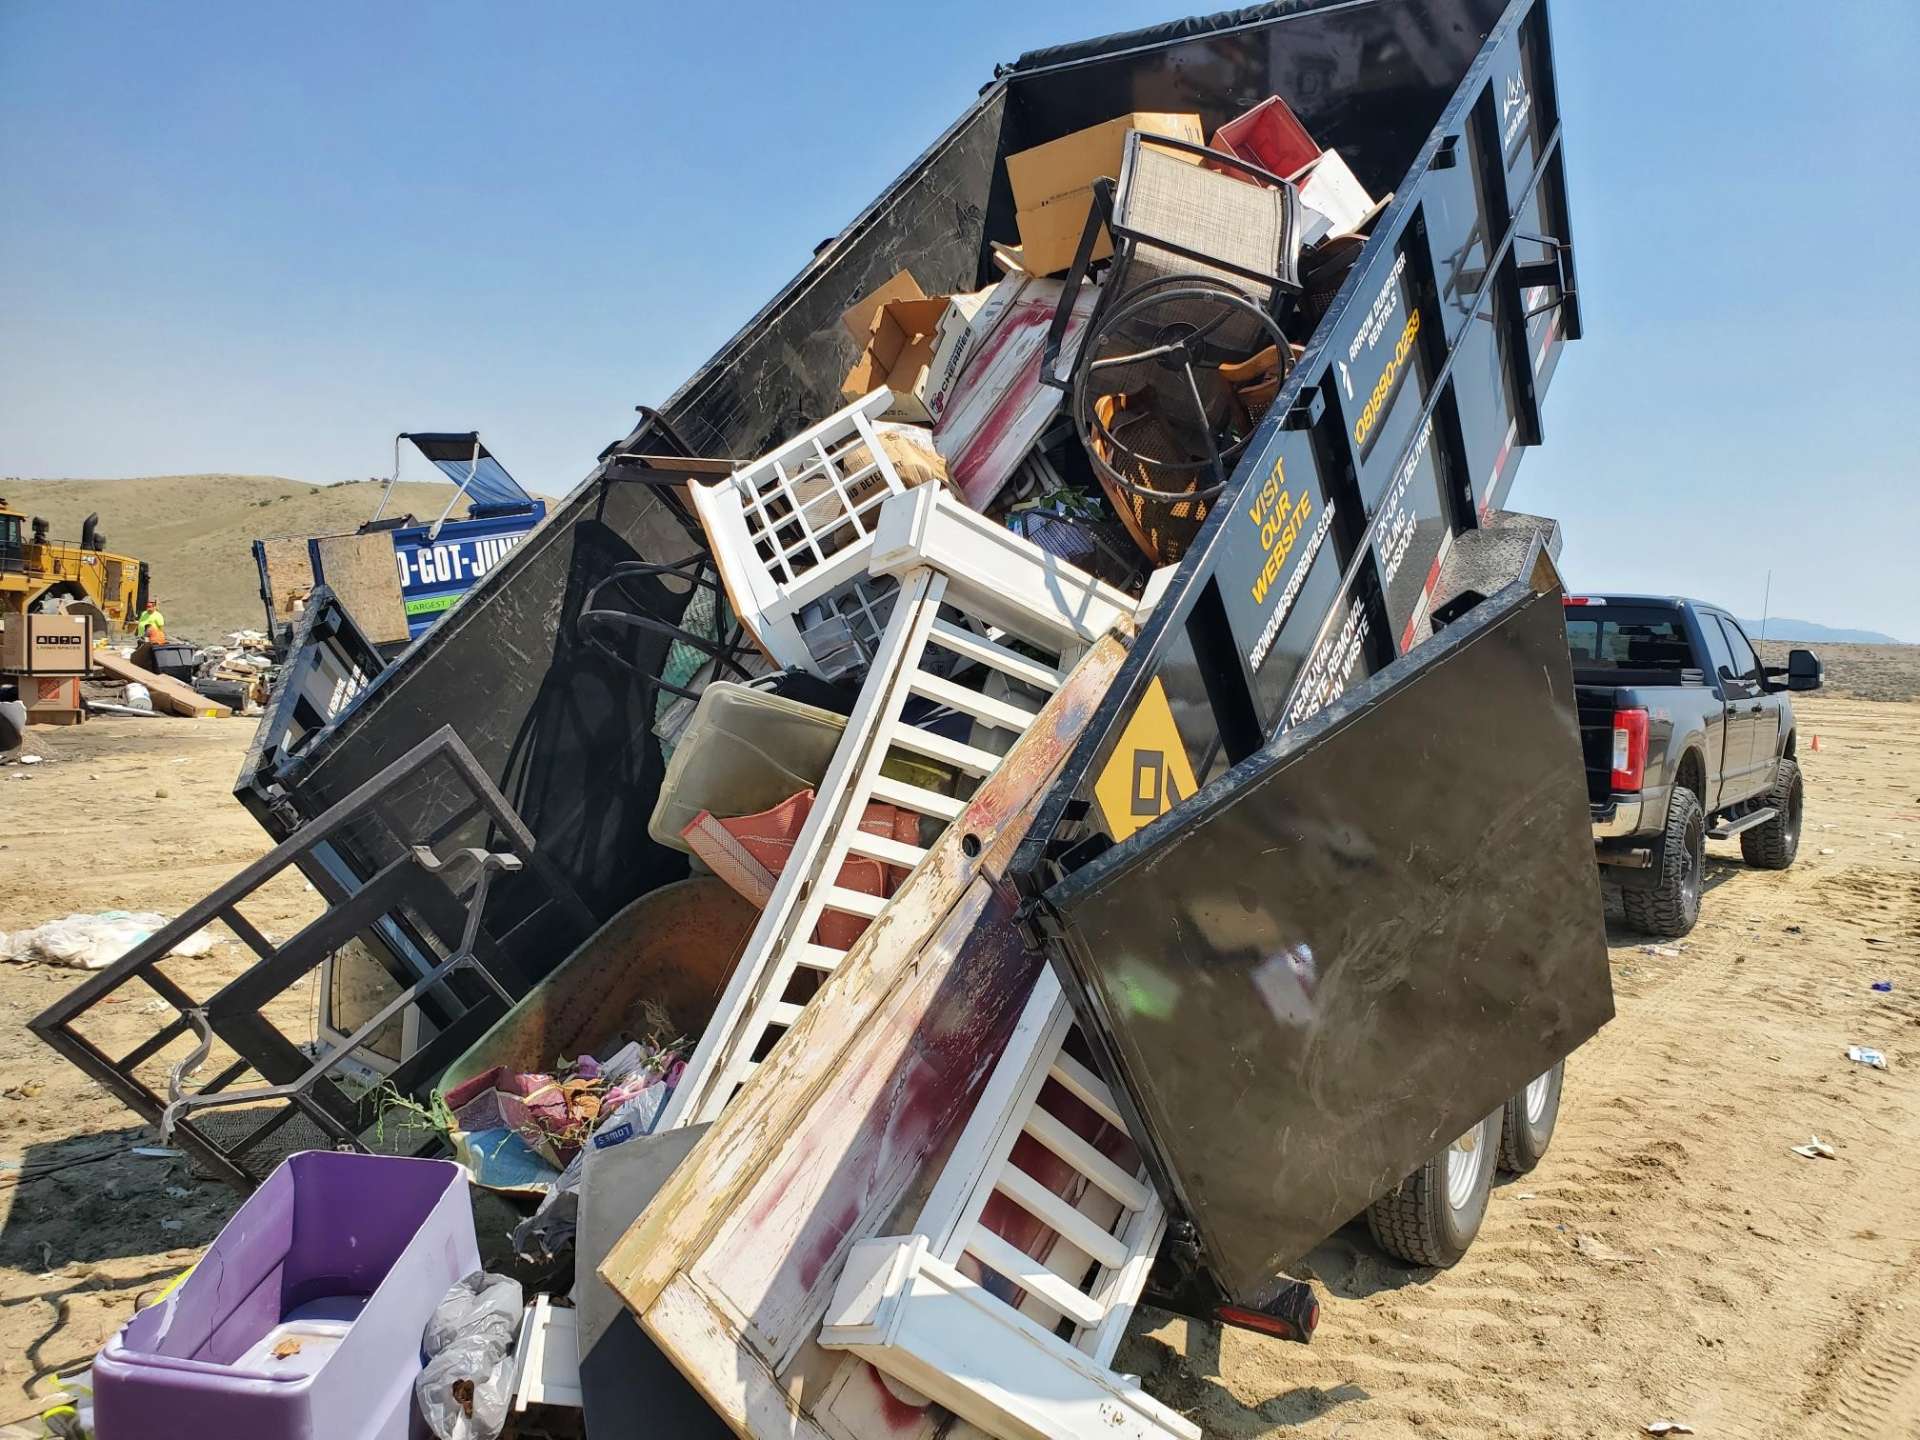 Junk Hauling Dumpster Trailer Rental - Toss and Tote